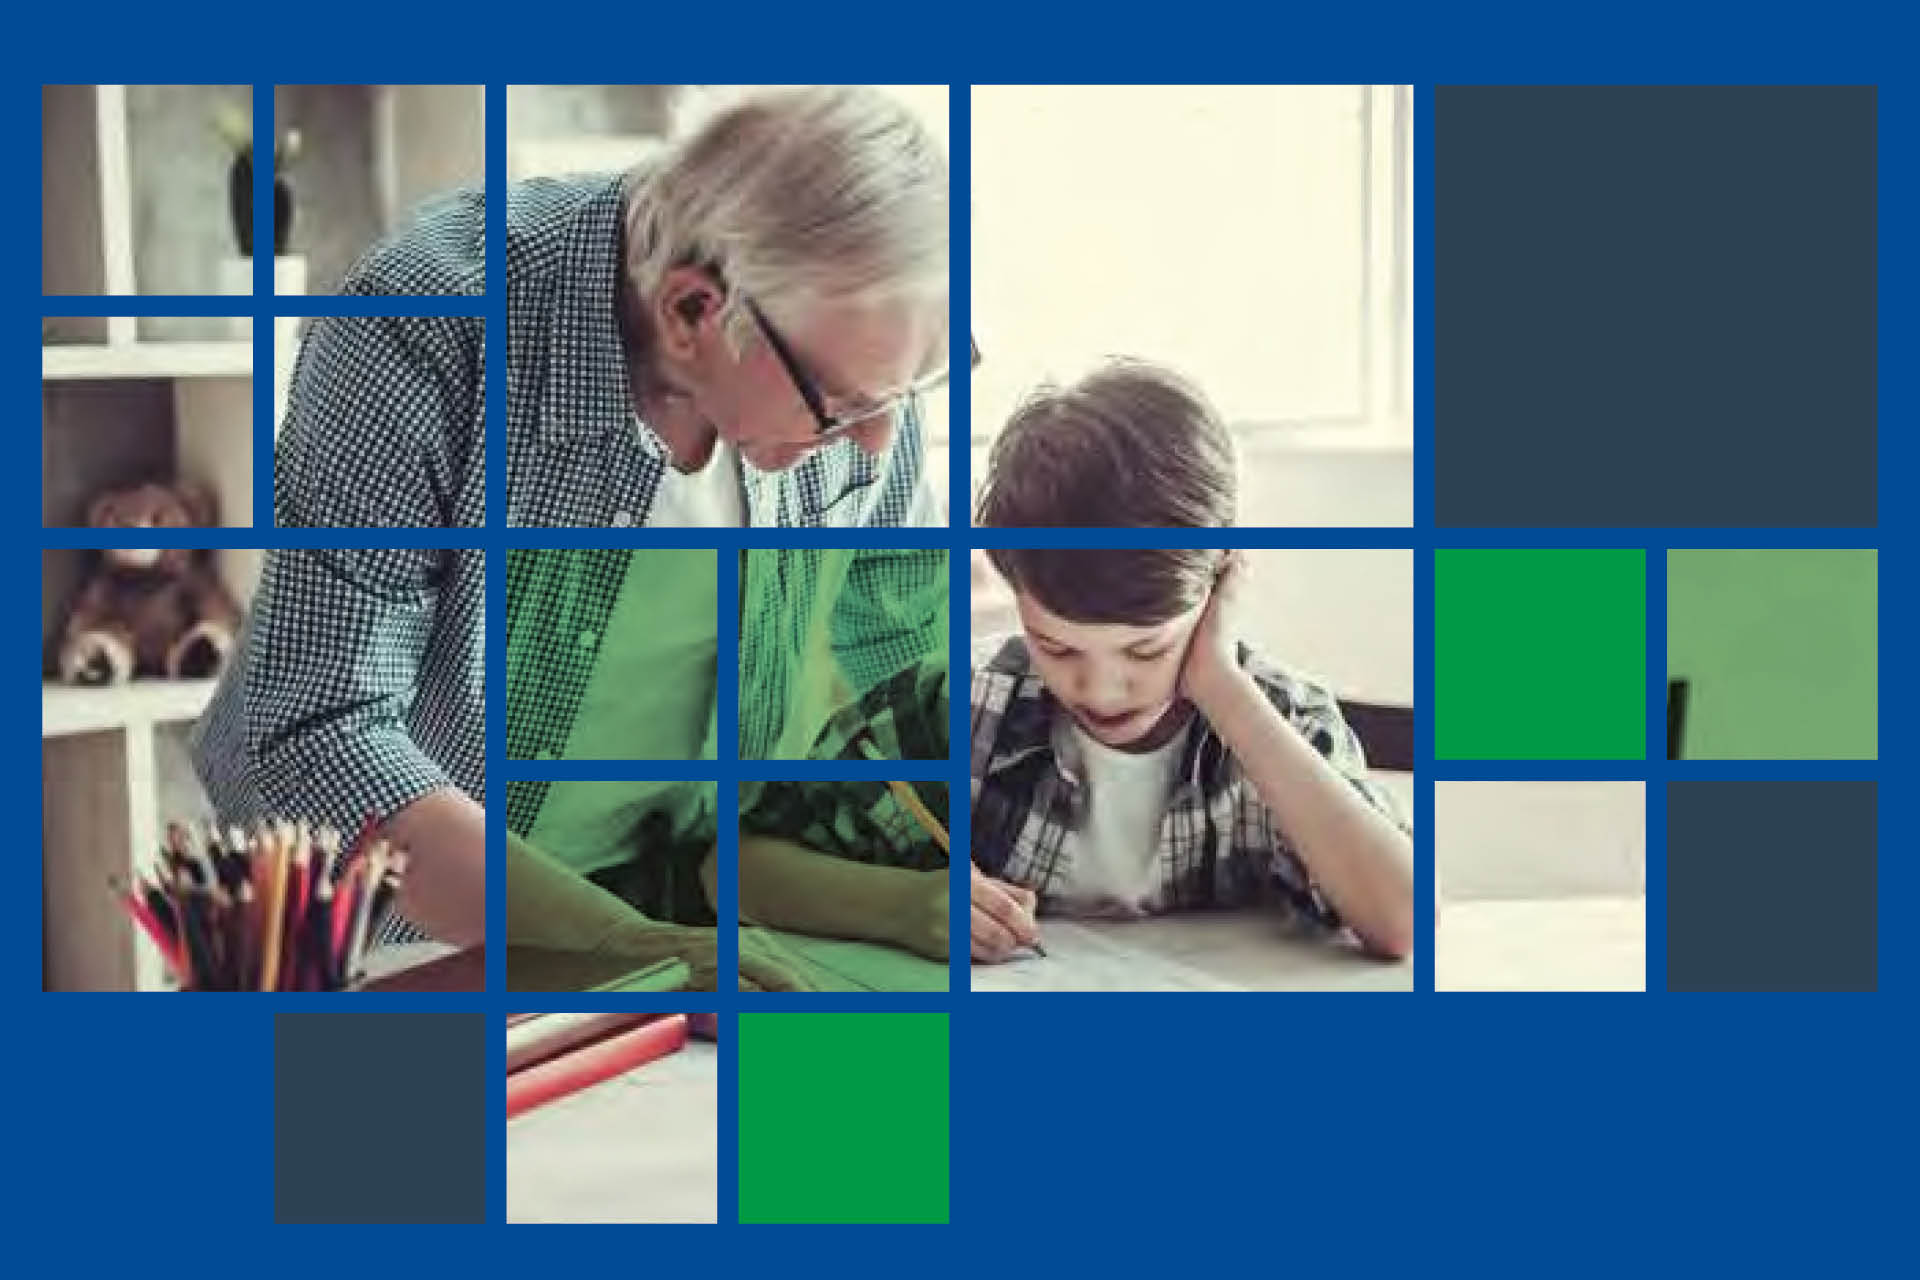 a photo of a man helping a boy with homework with a blue square overlay